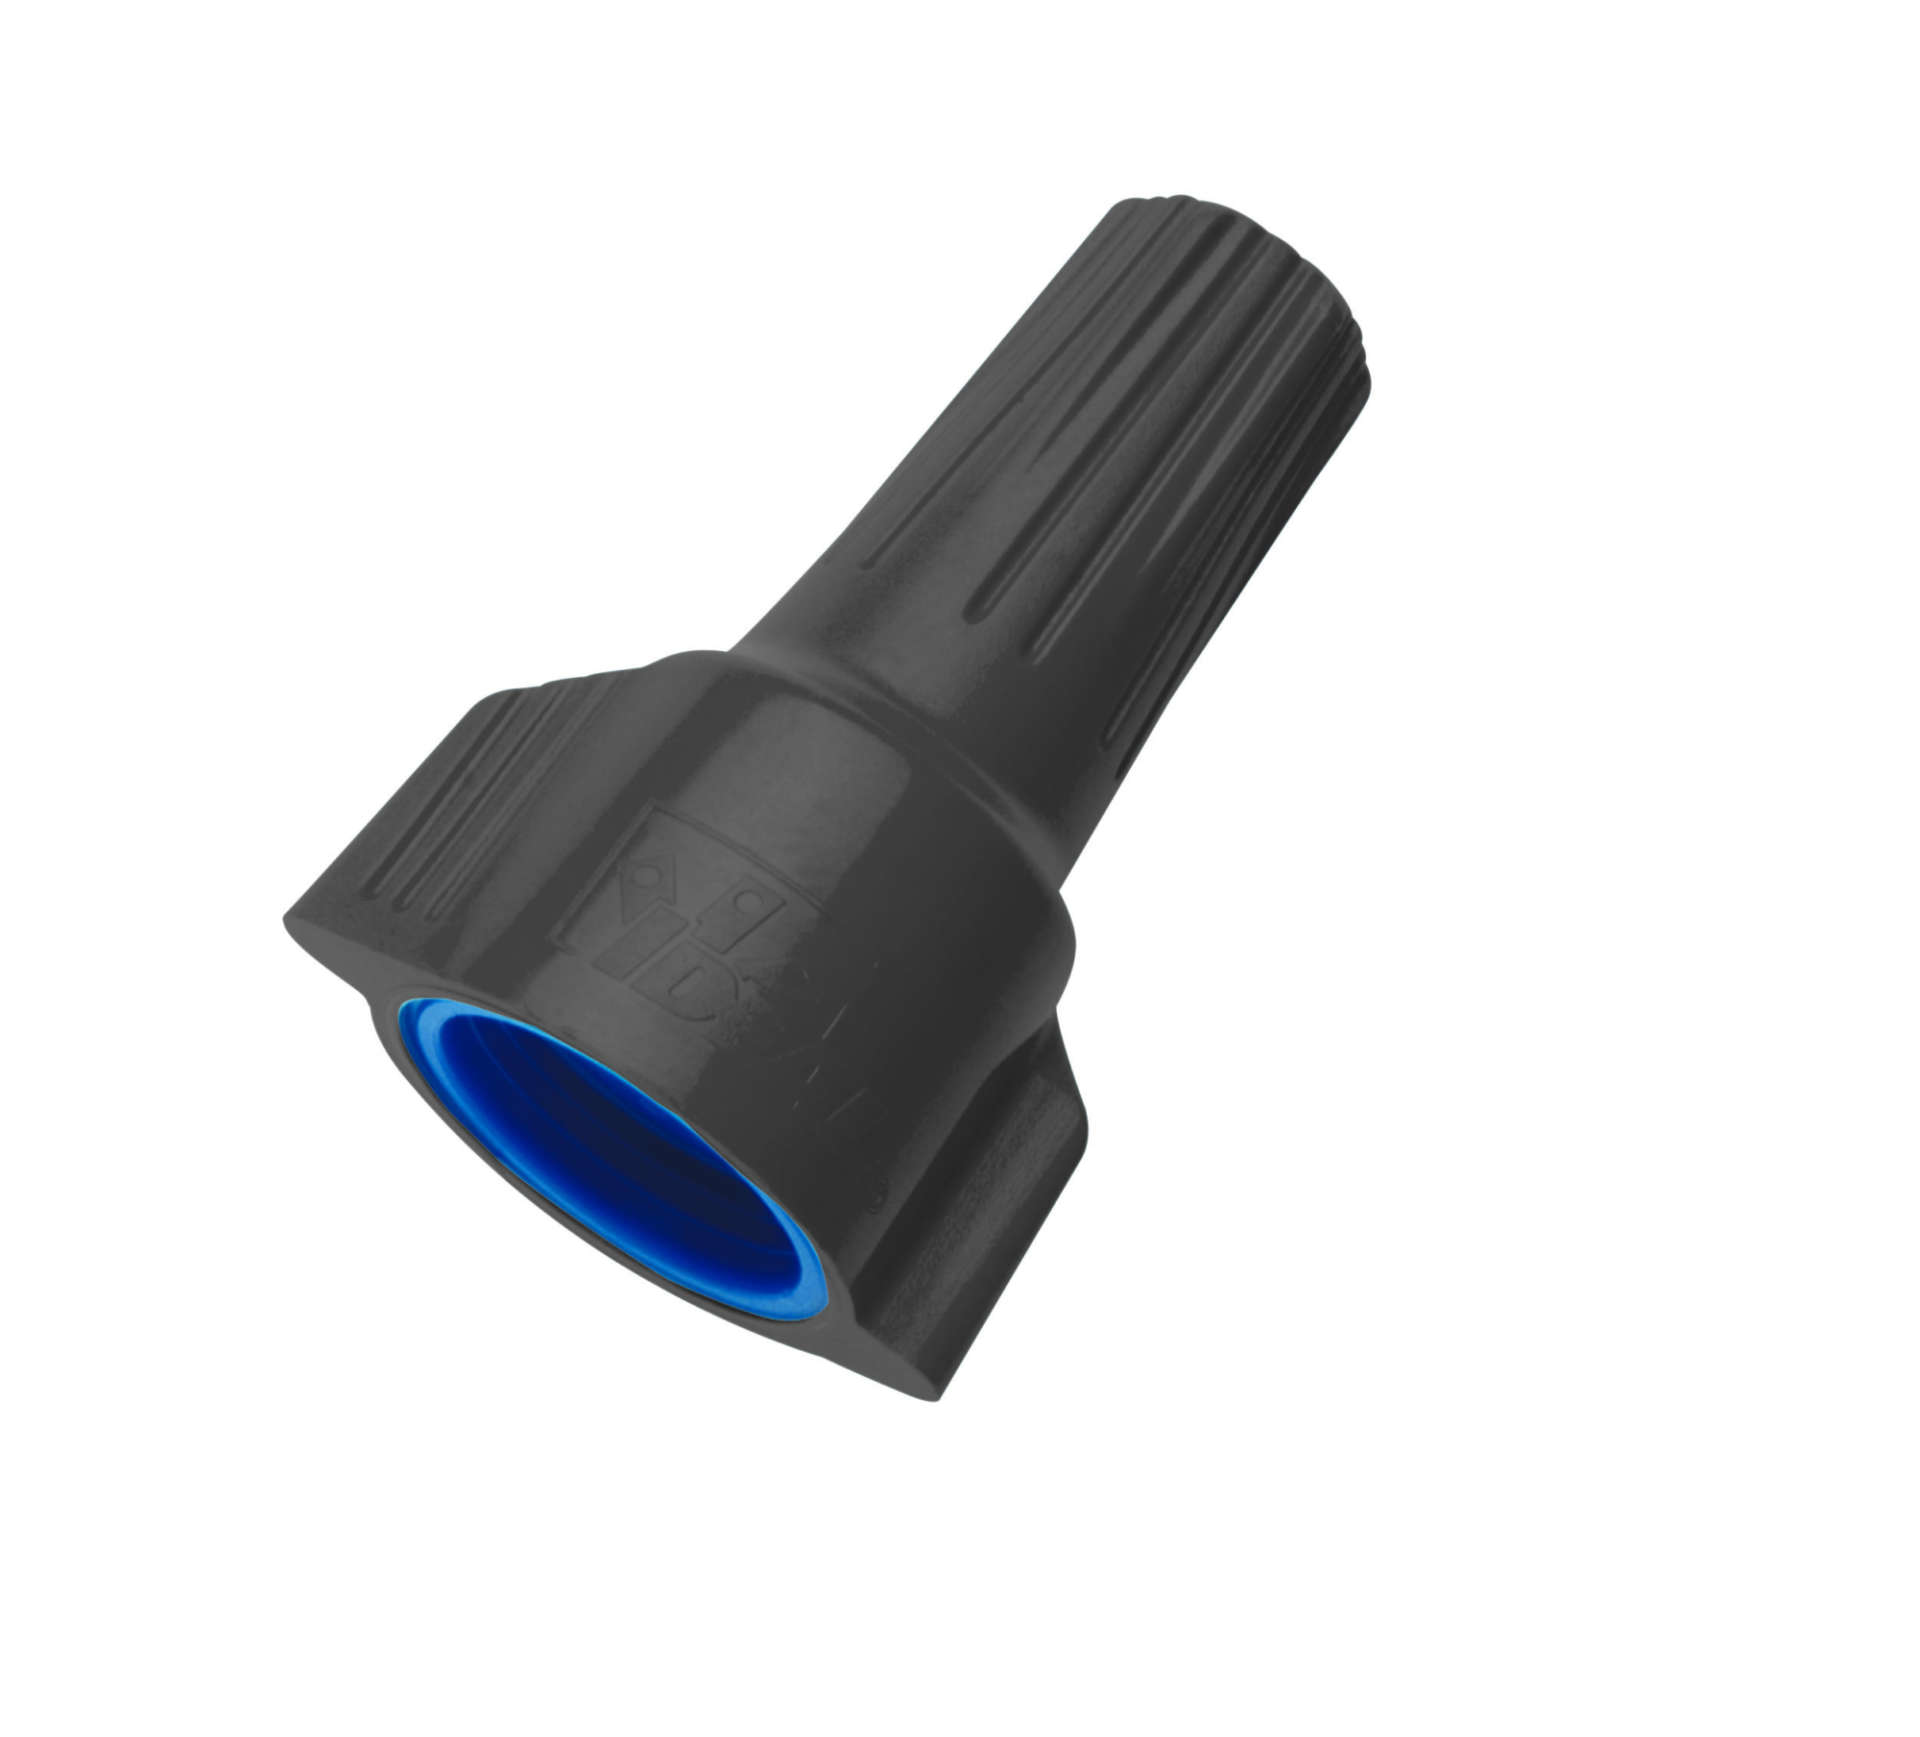 IDEAL Model 63 WIRE GEL CONNECTOR